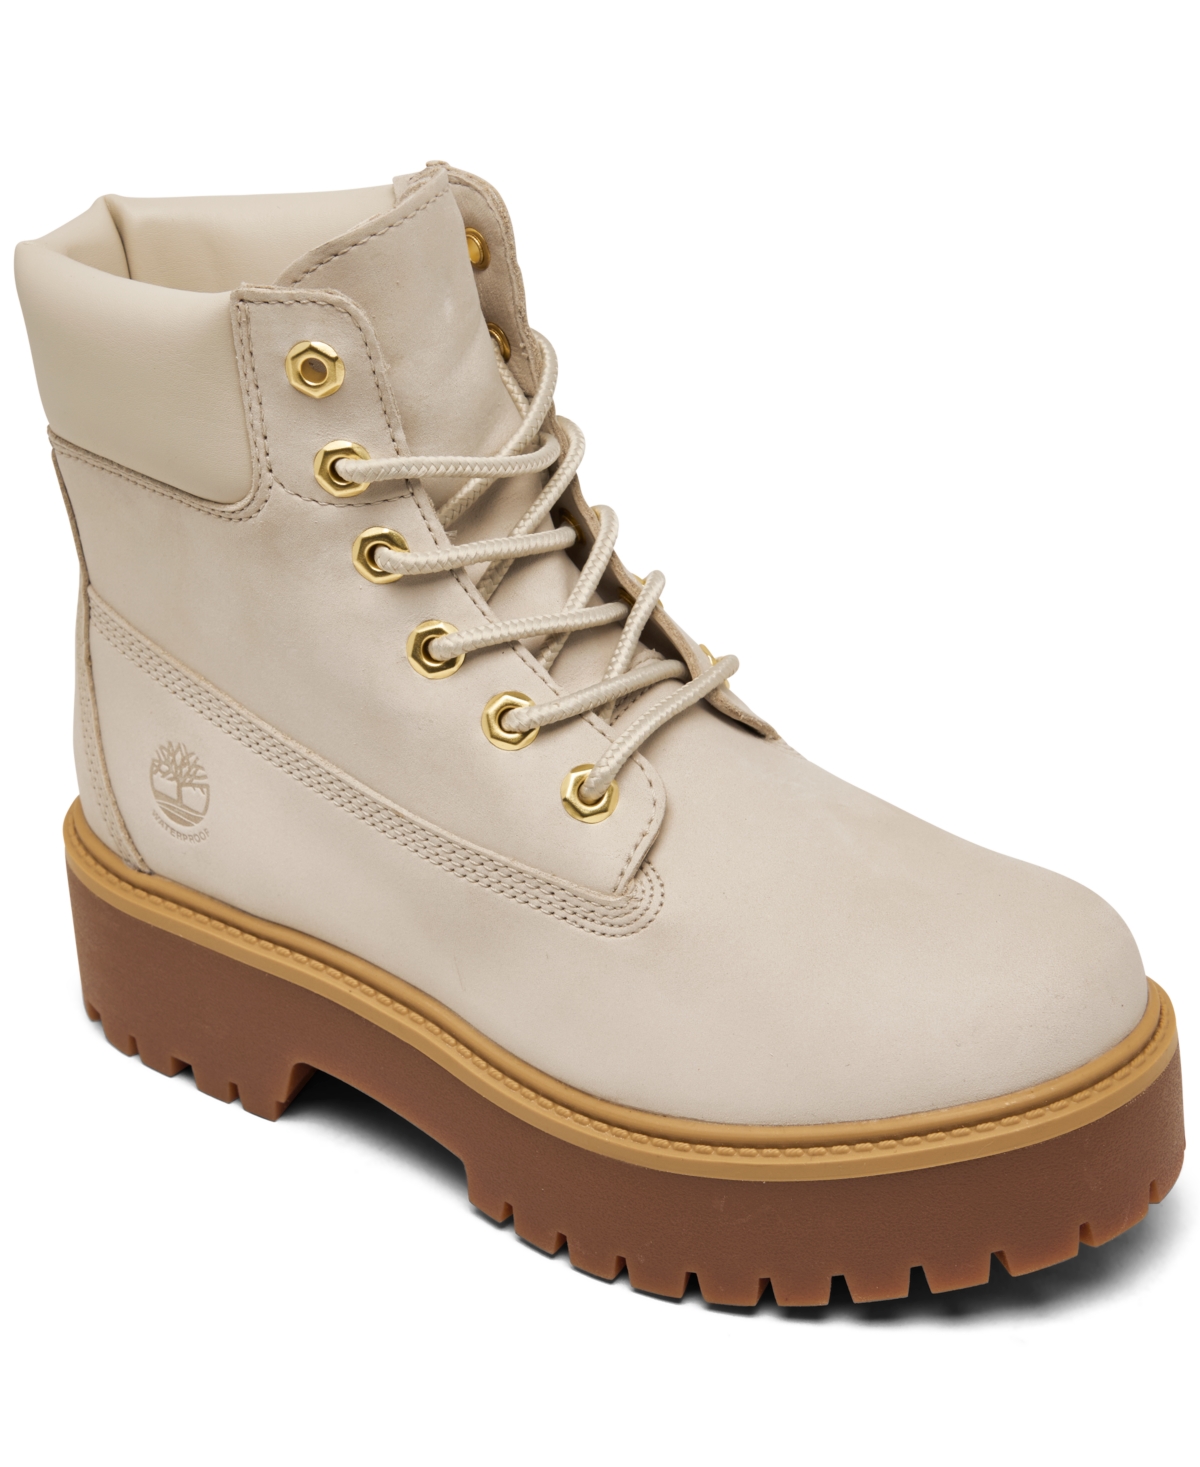 Timberland Women's Stone Street 6" Water Resistant Platform Boots From Finish Line In Rainy Day